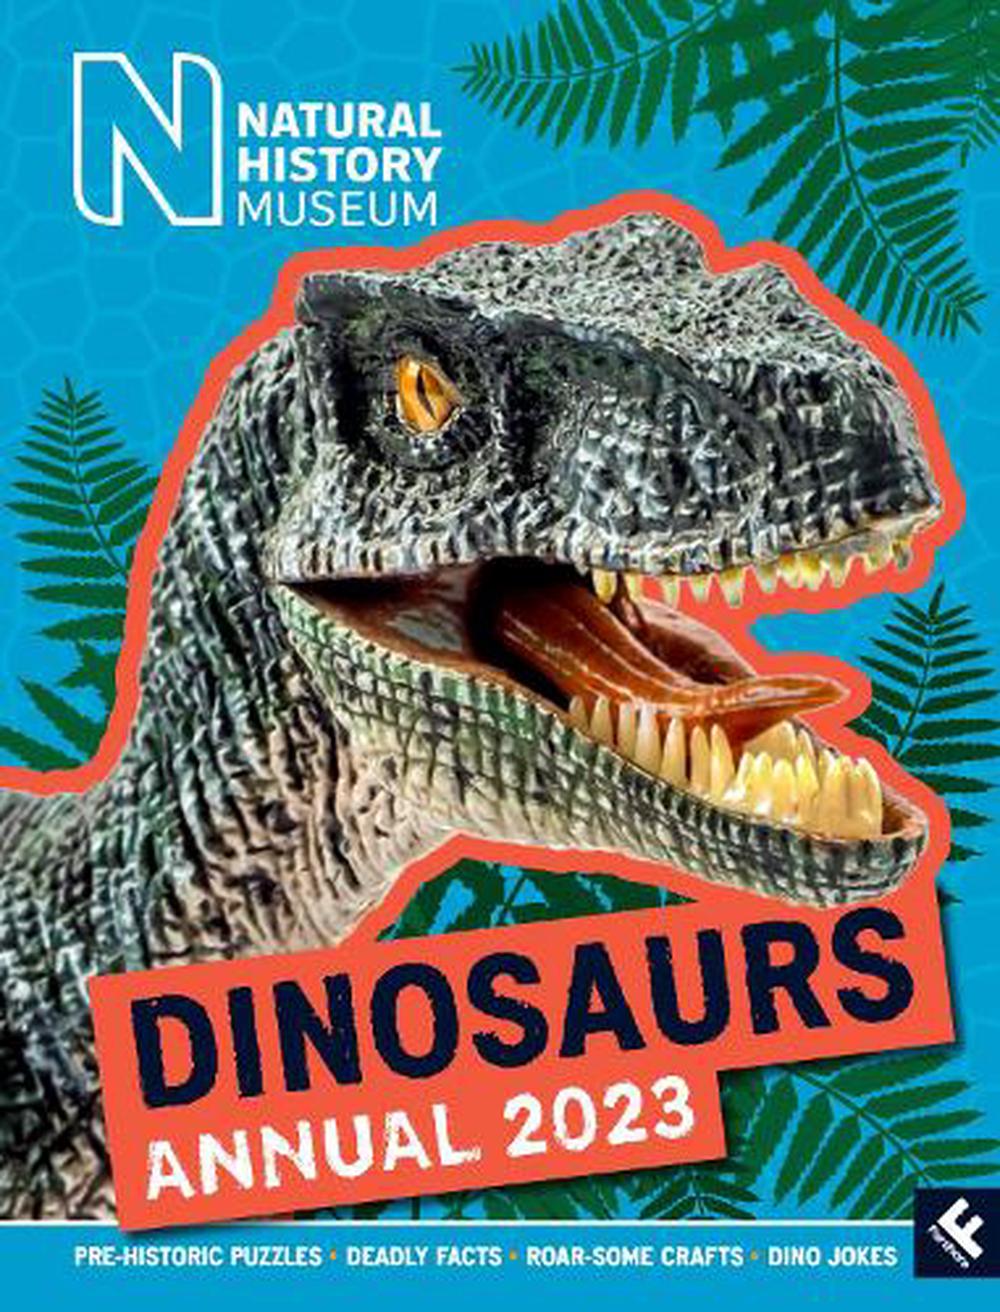 Natural History Museum Dinosaurs Annual 2023 by Natural History Museum ...